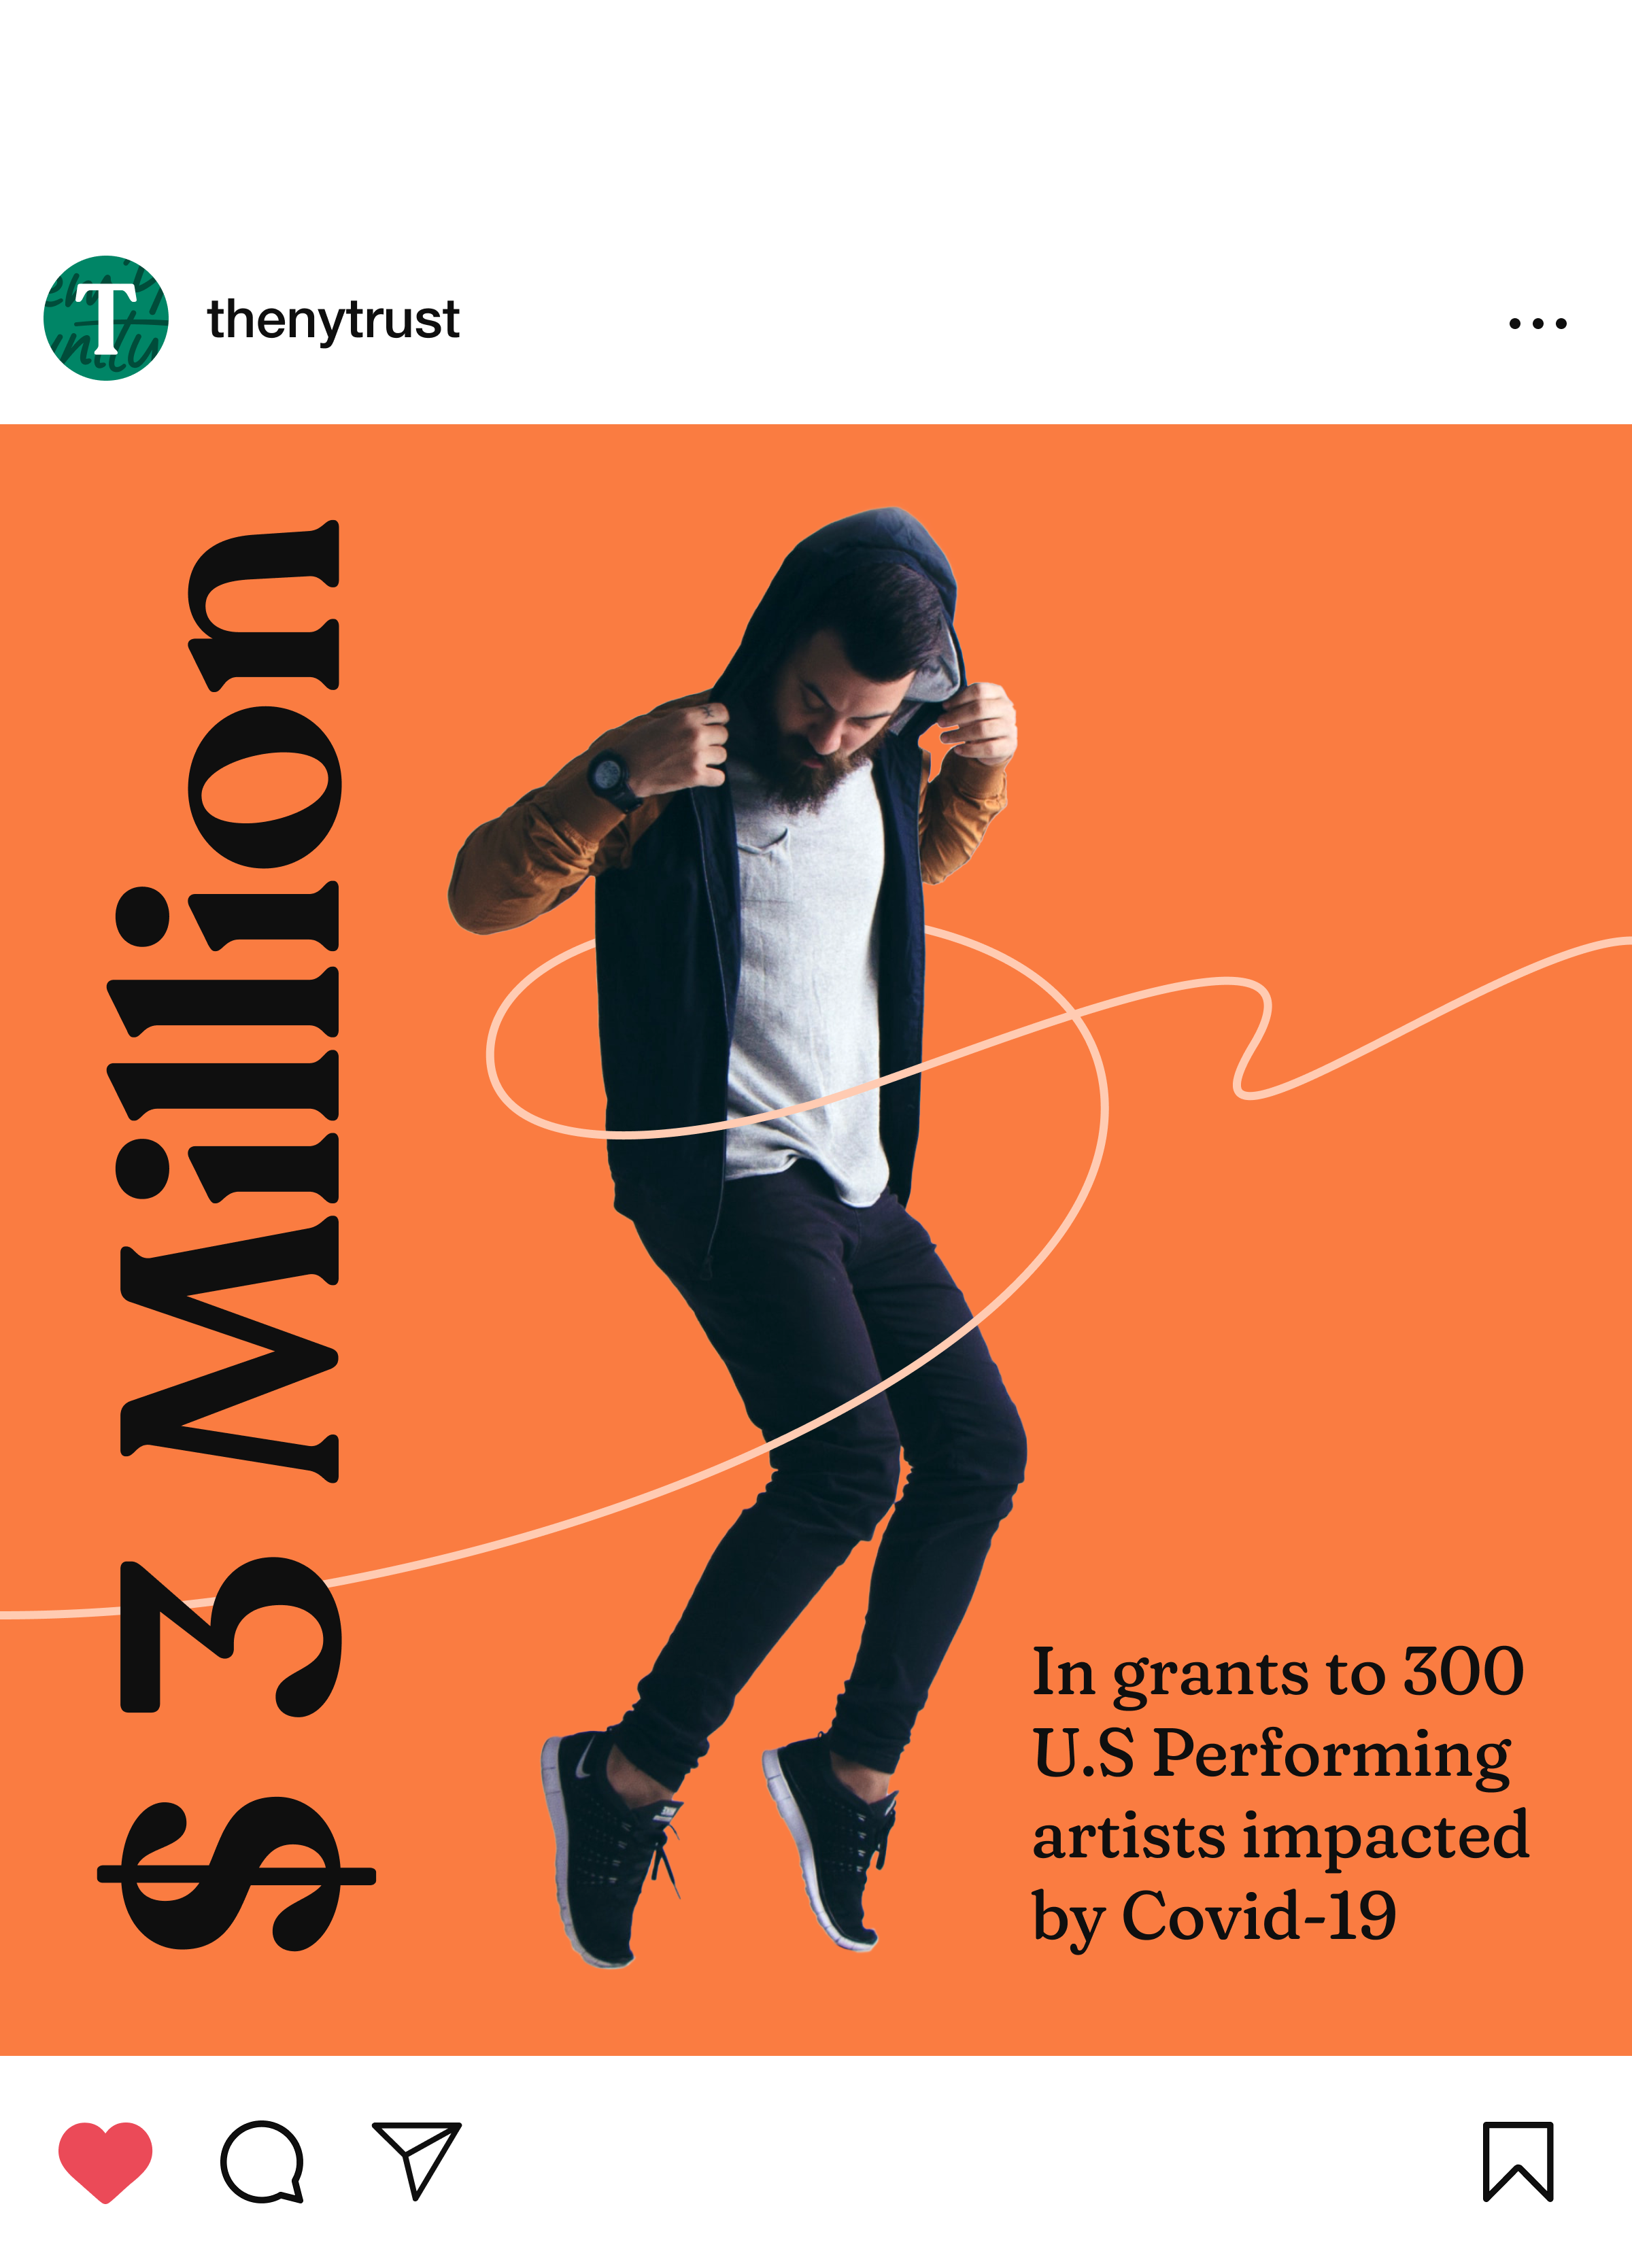 A person wearing a hooded sweatshirt and sneakers is dancing against an orange background. Large text on the left reads "$3 Million," and smaller text on the right states, "In grants to 300 U.S. Performing artists impacted by Covid-19." The Instagram handle "thenytrust" is at the top.